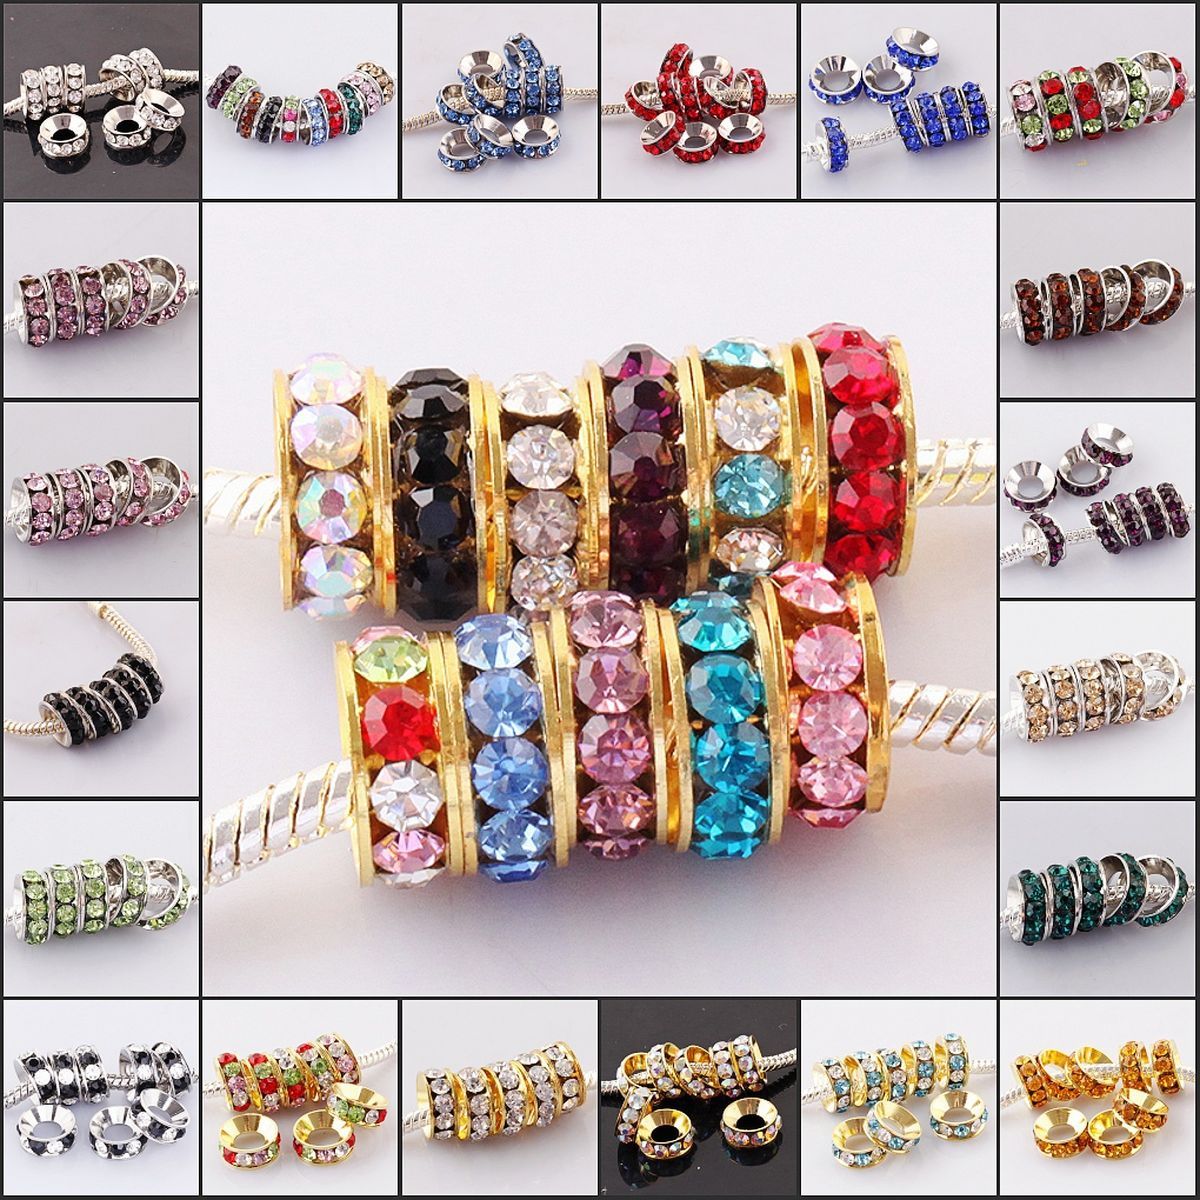 Wholesale Lots 10mm Crystal Findings Charm Big Hole European Beads Fit